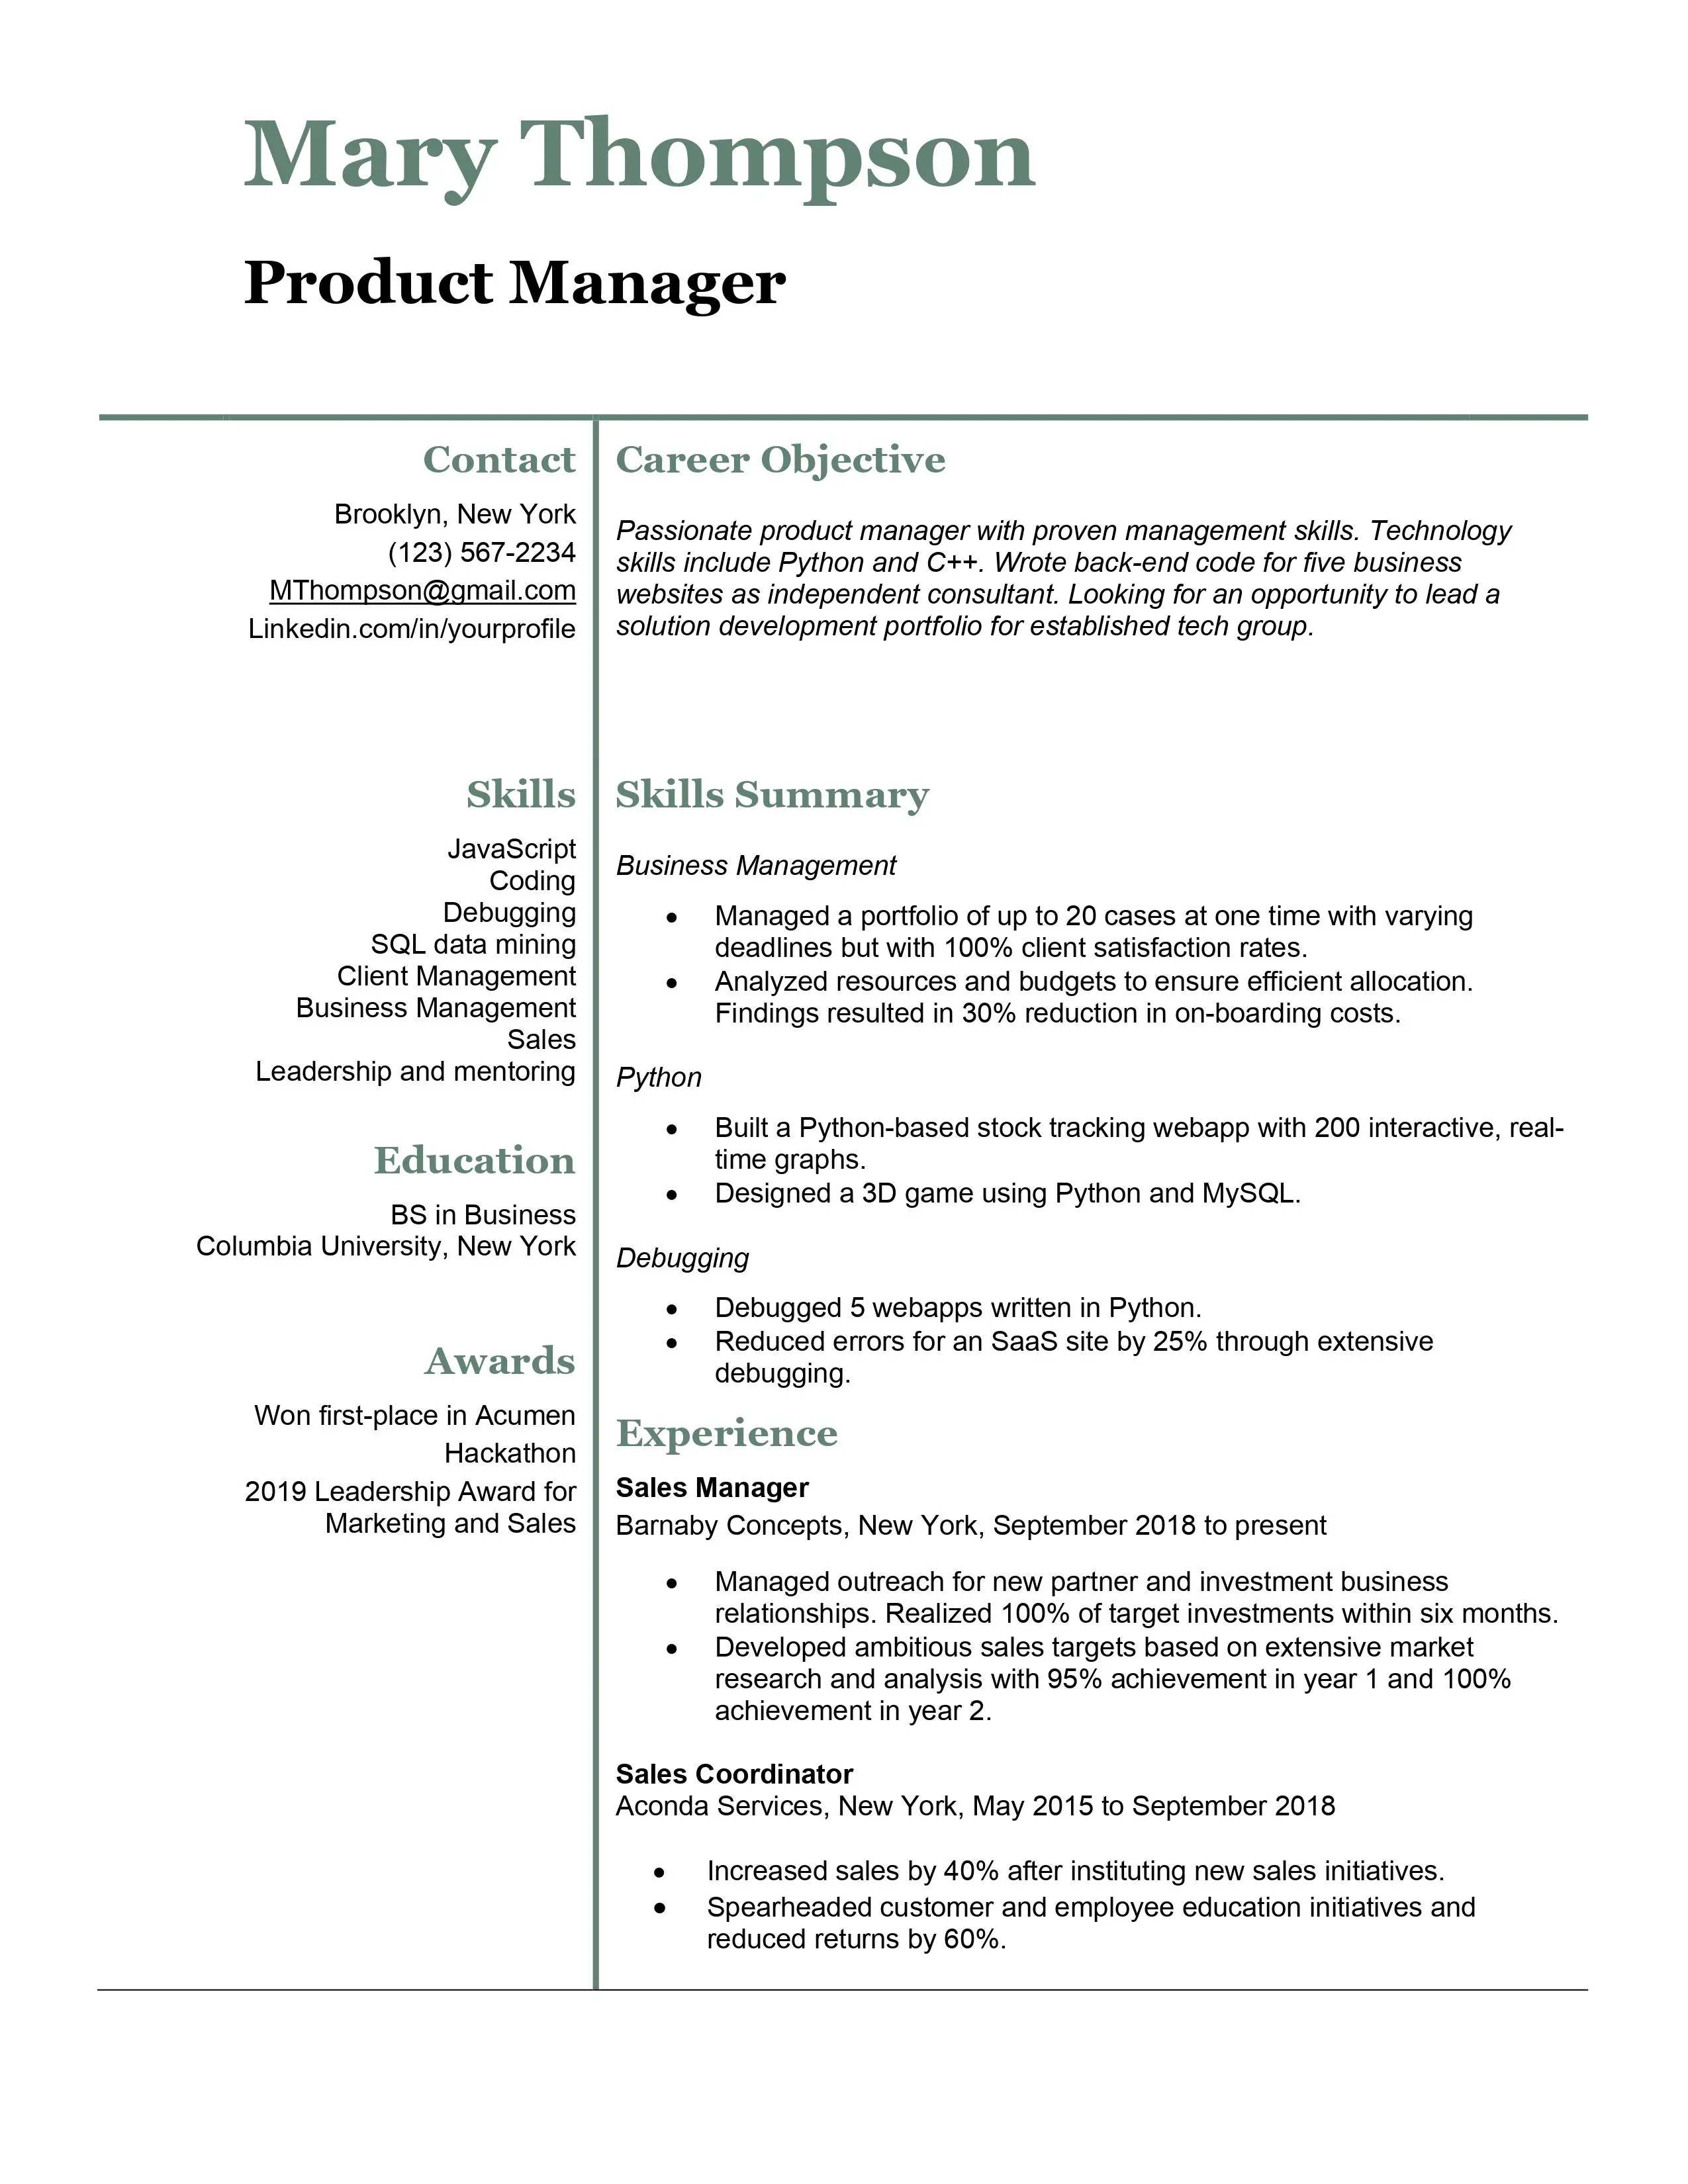 example resume objectives for career change